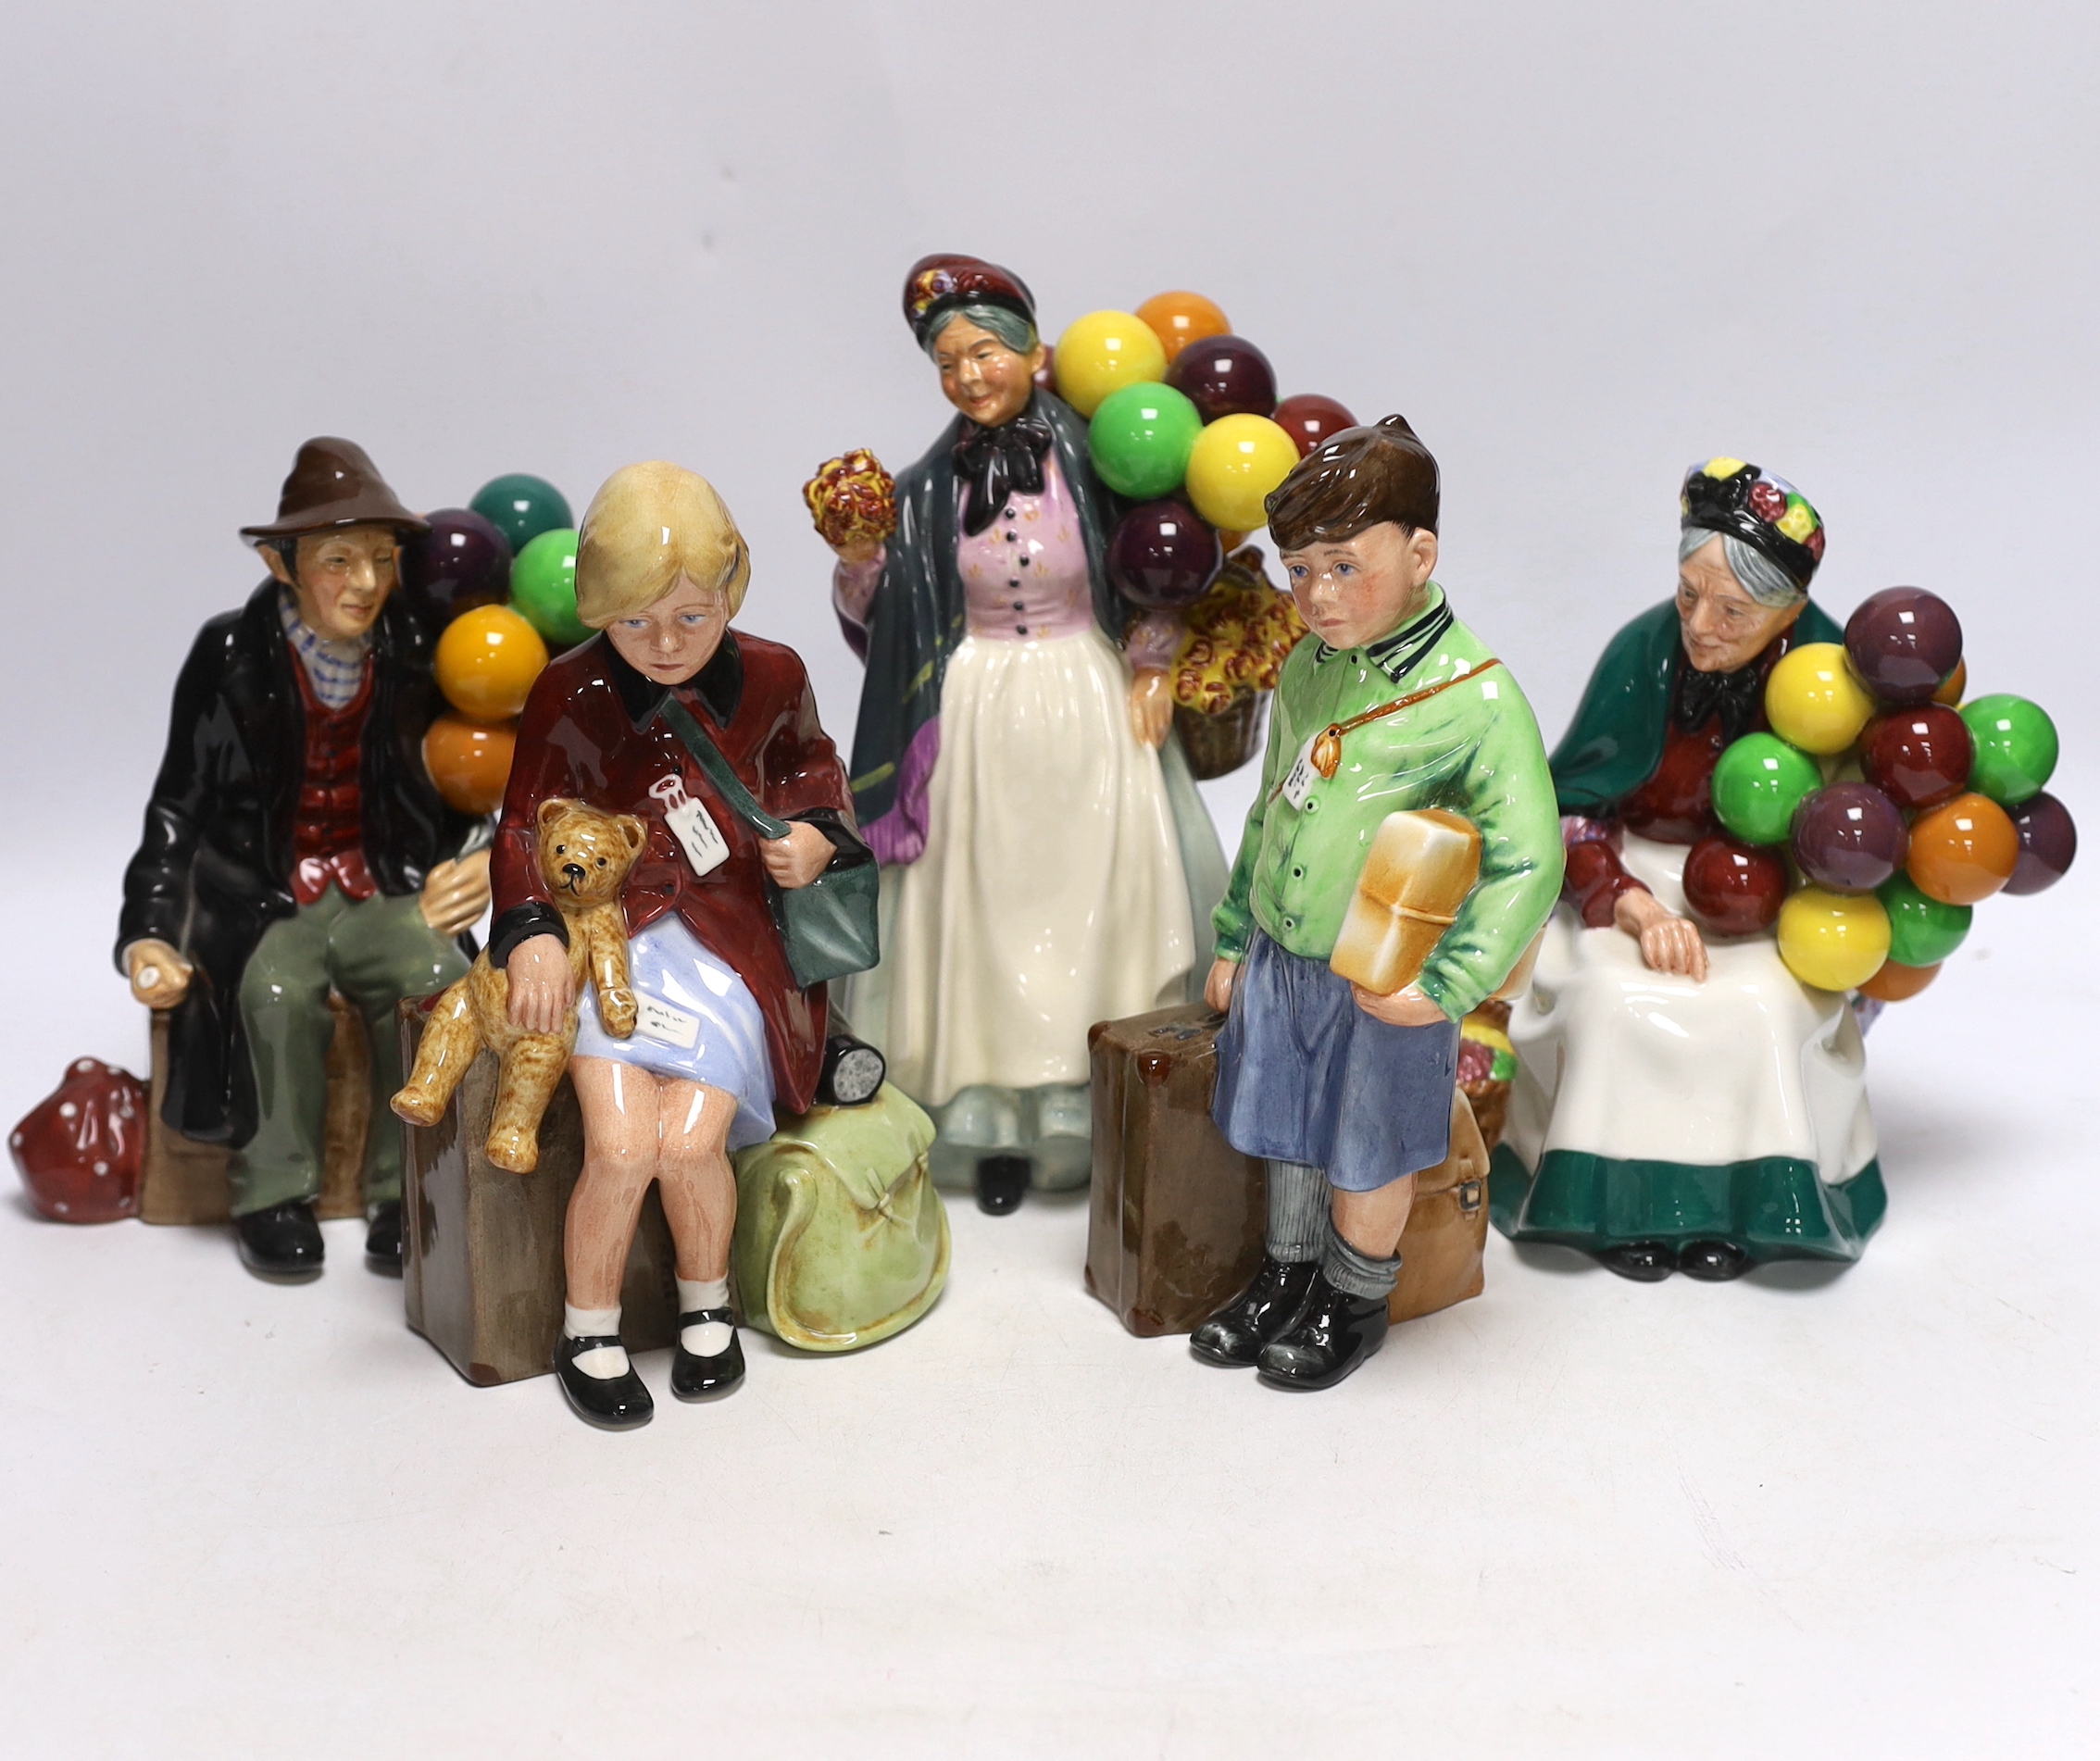 Royal Doulton figures: 'Girl Evacuee' and 'Boy Evacuee', 'The Old Balloon Seller', 'The Balloon Man', 'Diddy Penny Farthing', tallest 23cm high